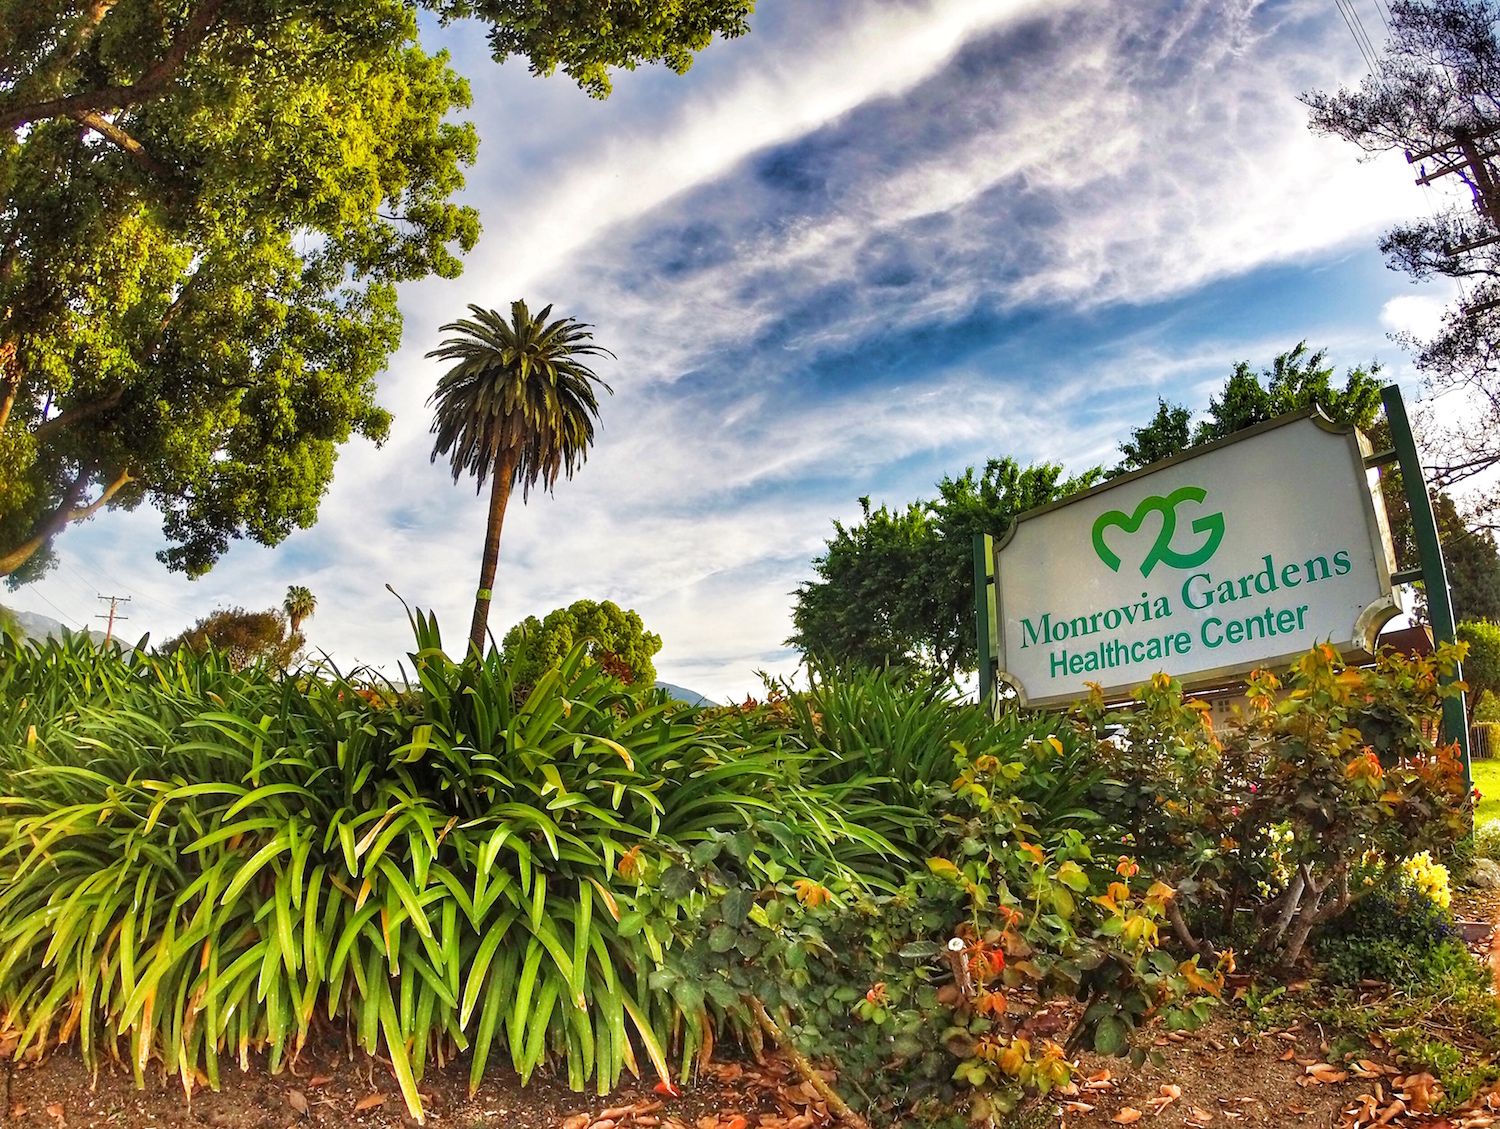  Welcome To Monrovia Gardens,   We're glad to have you.    Schedule An Appointment Today  